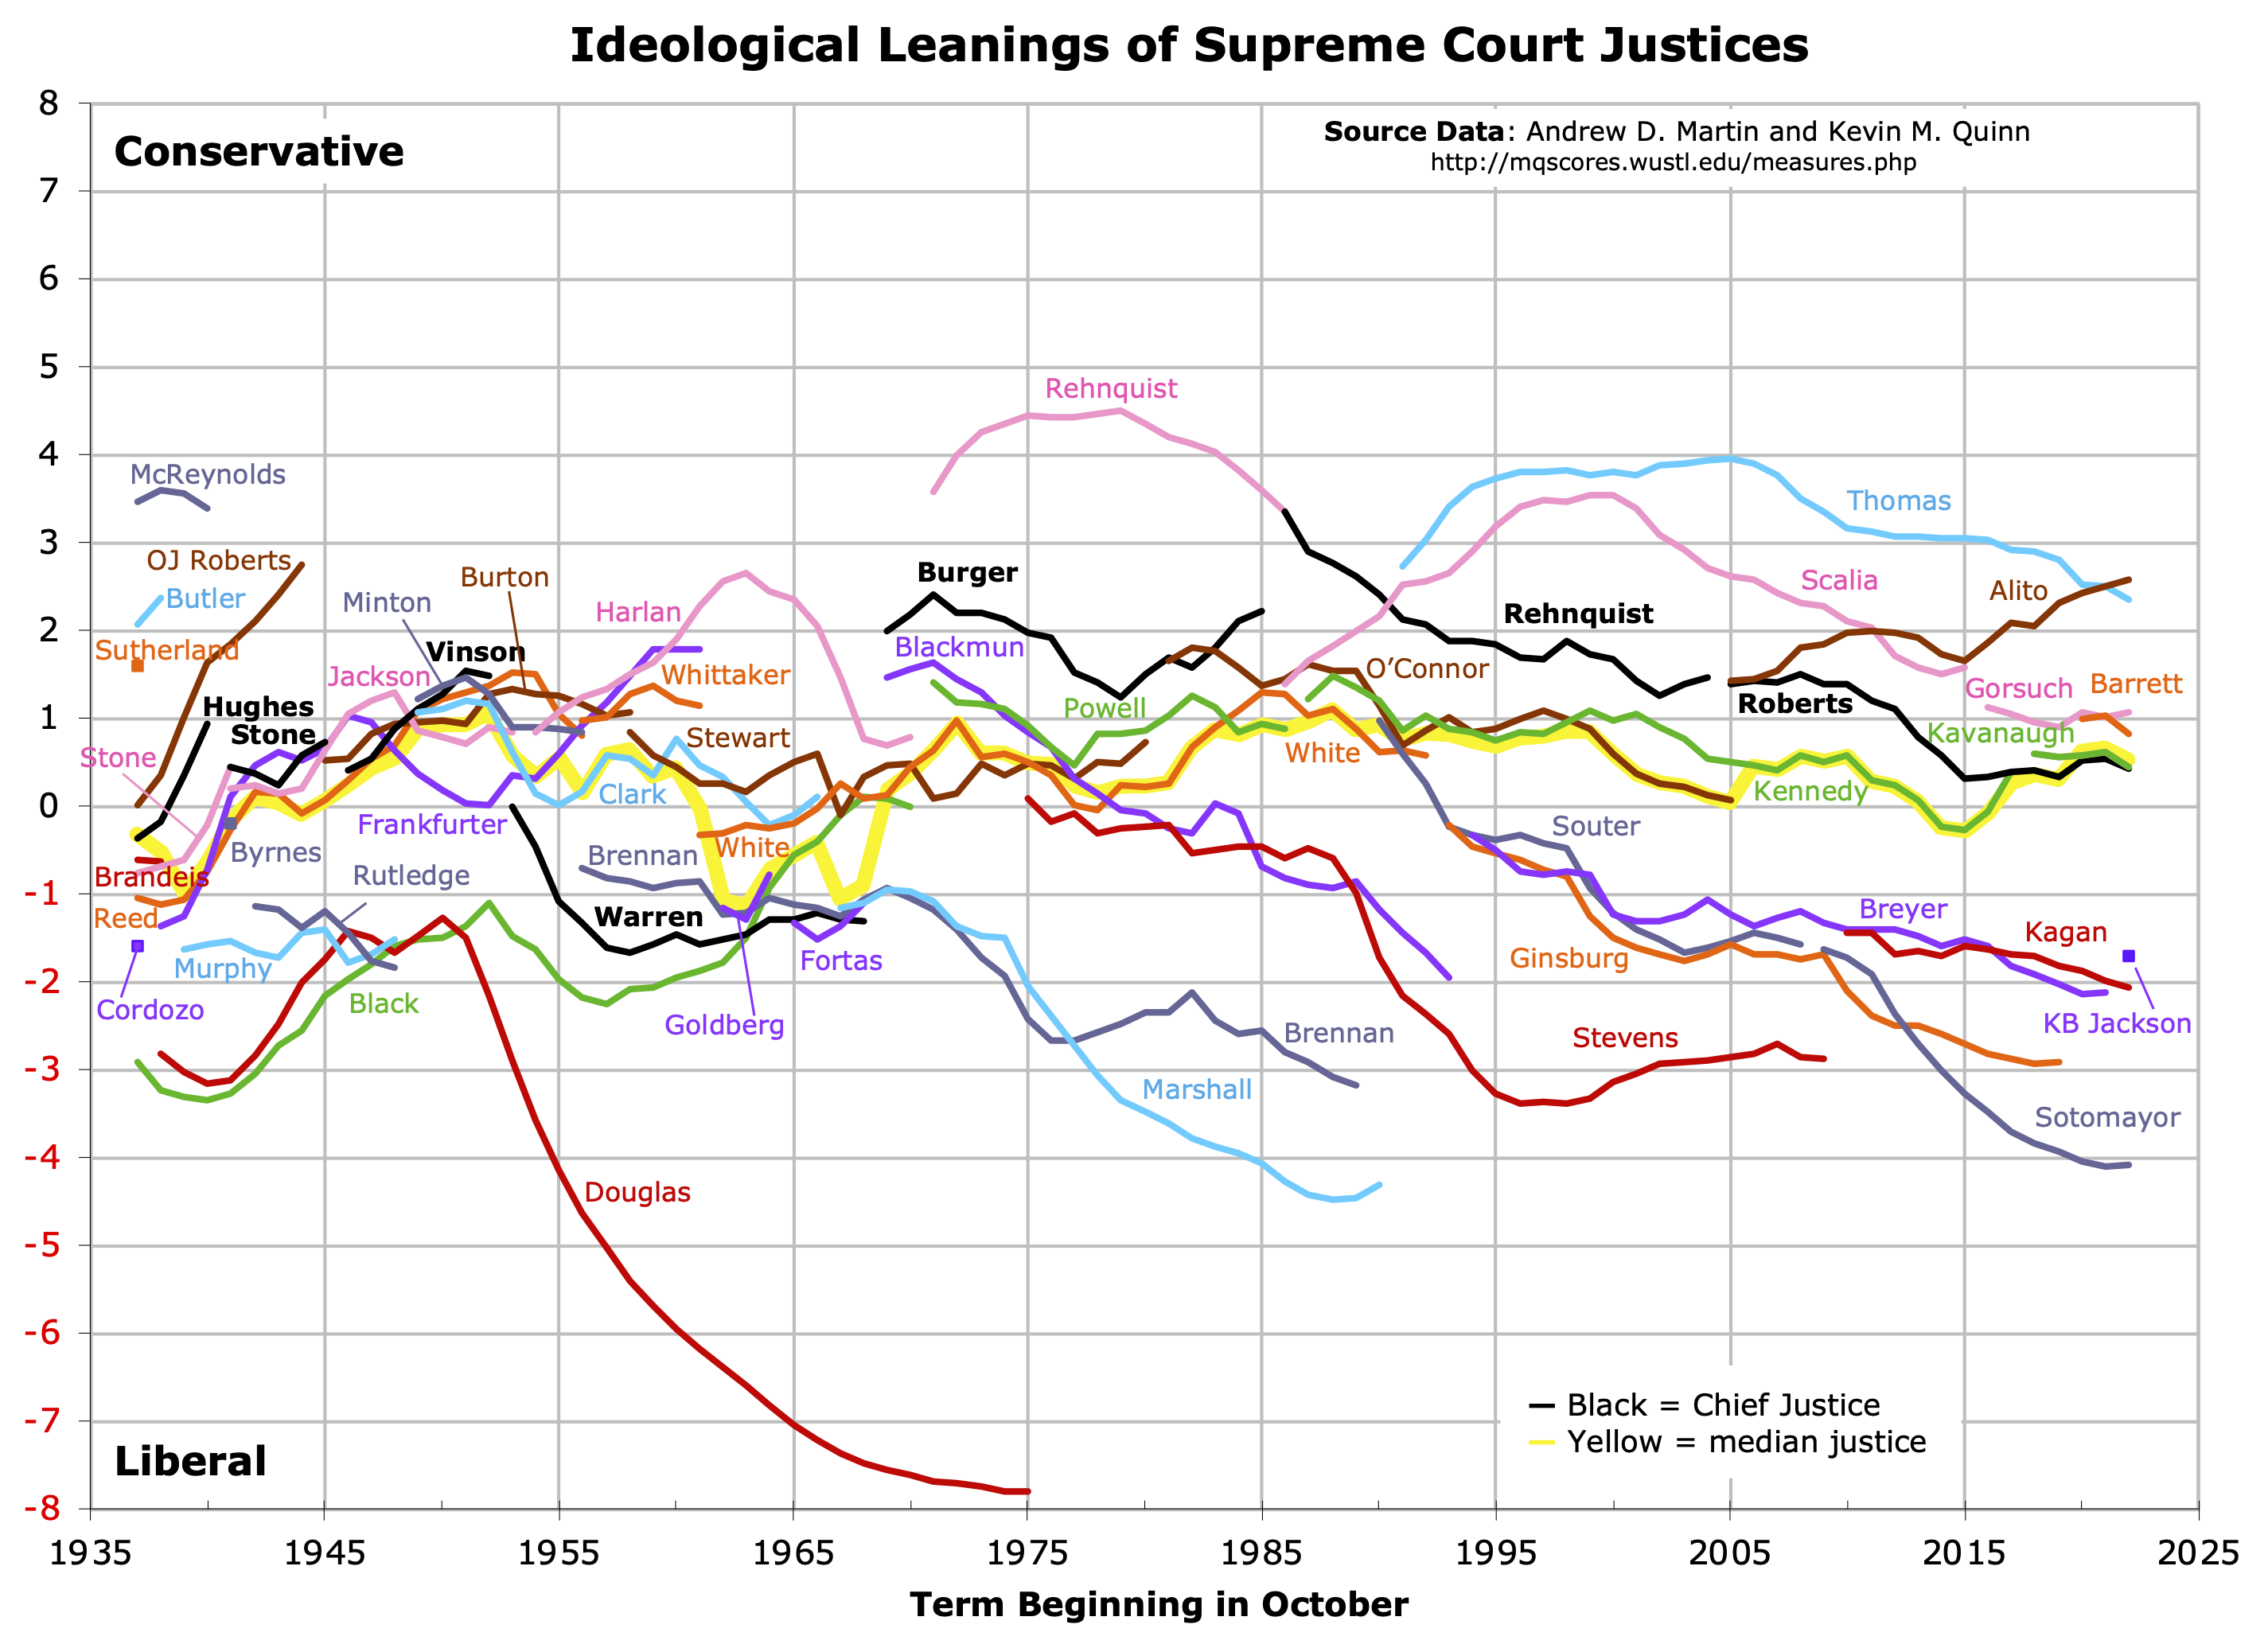 Graph_of_Martin-Quinn_Scores_of_Supreme_Court_Justices_1937-Now.png